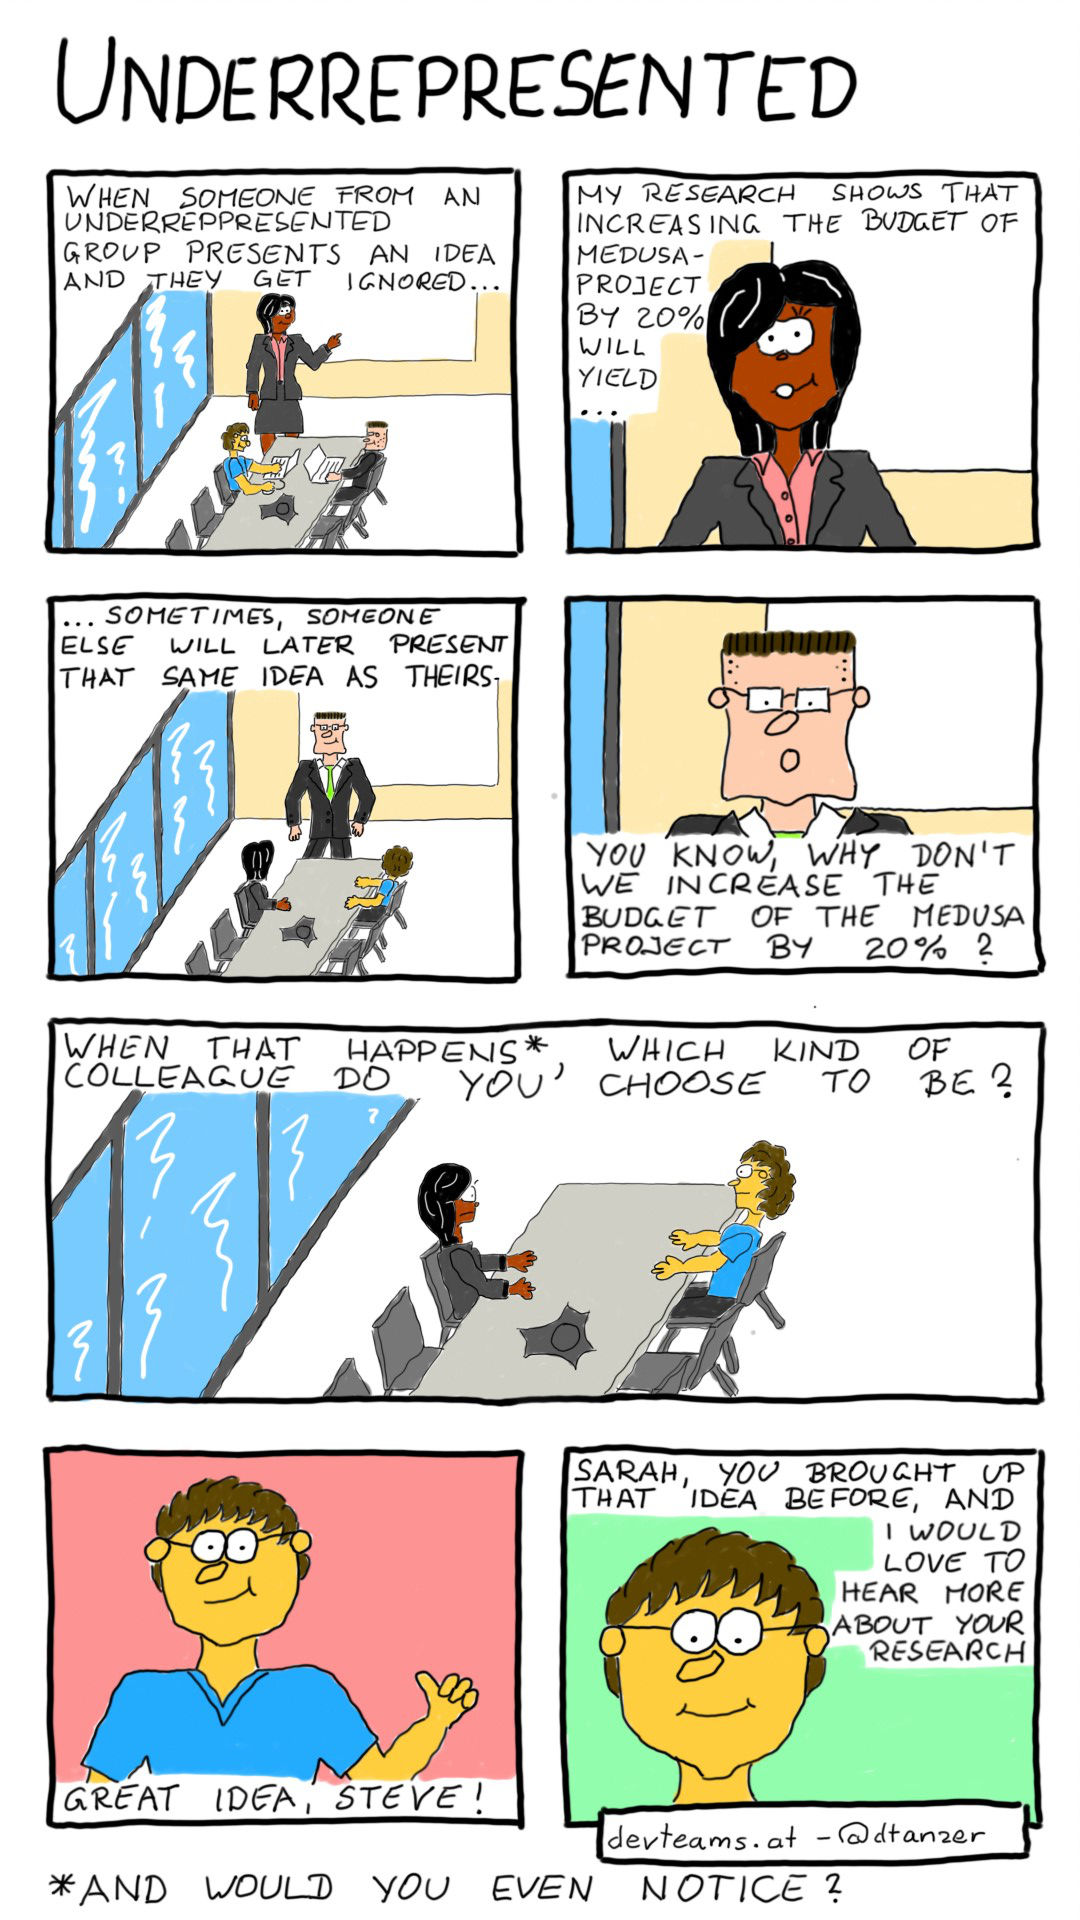 Comic about going back to a restrictive work-from-home policy after the pandemic. Transcript below the image.